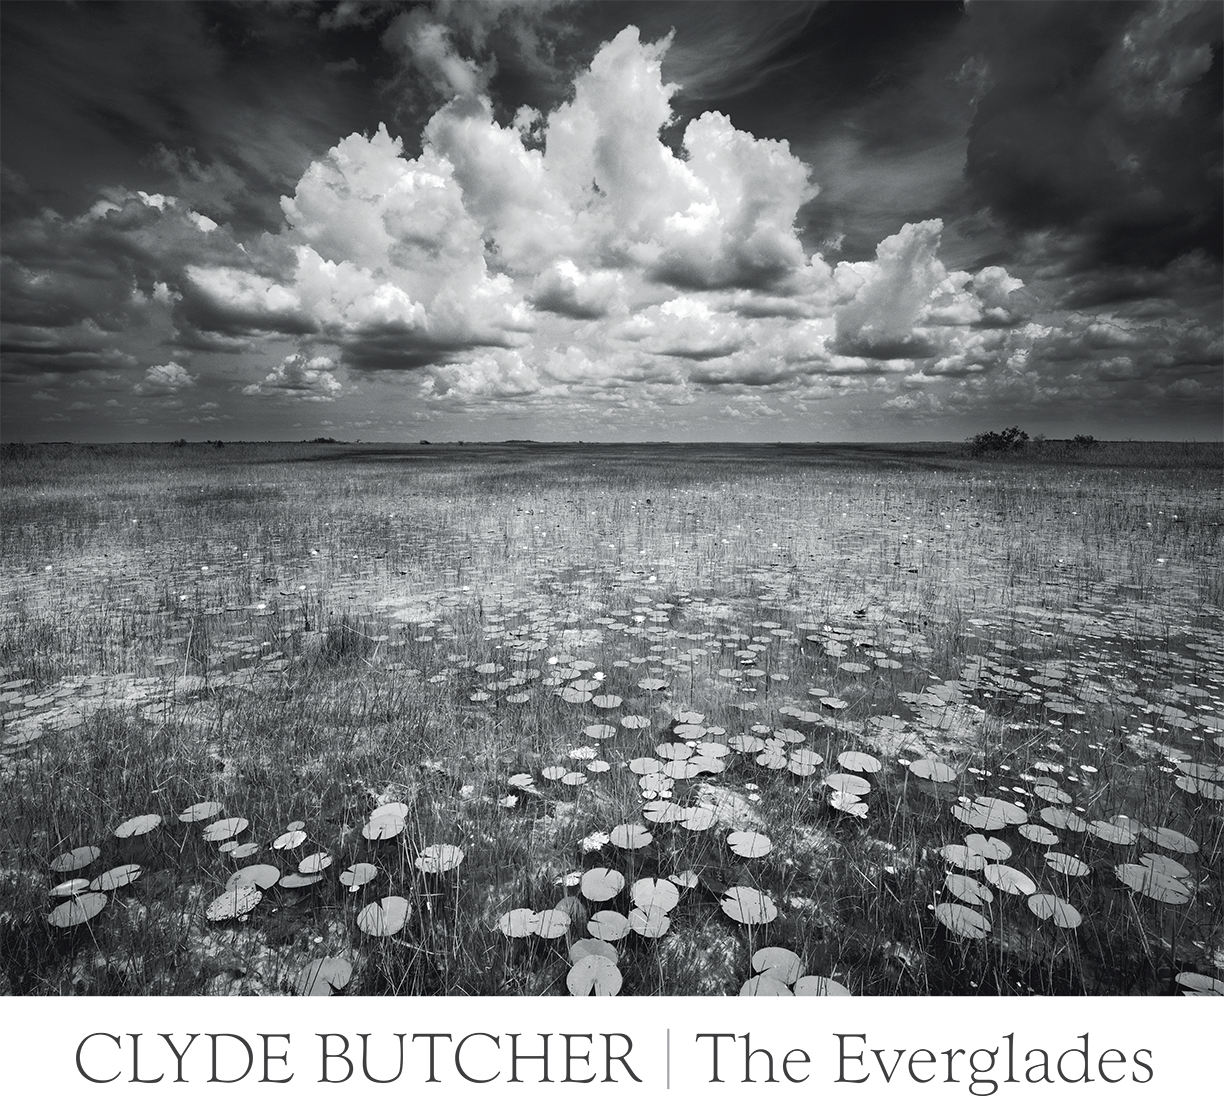 Cover image of Clyde Butchers book The Everglades.